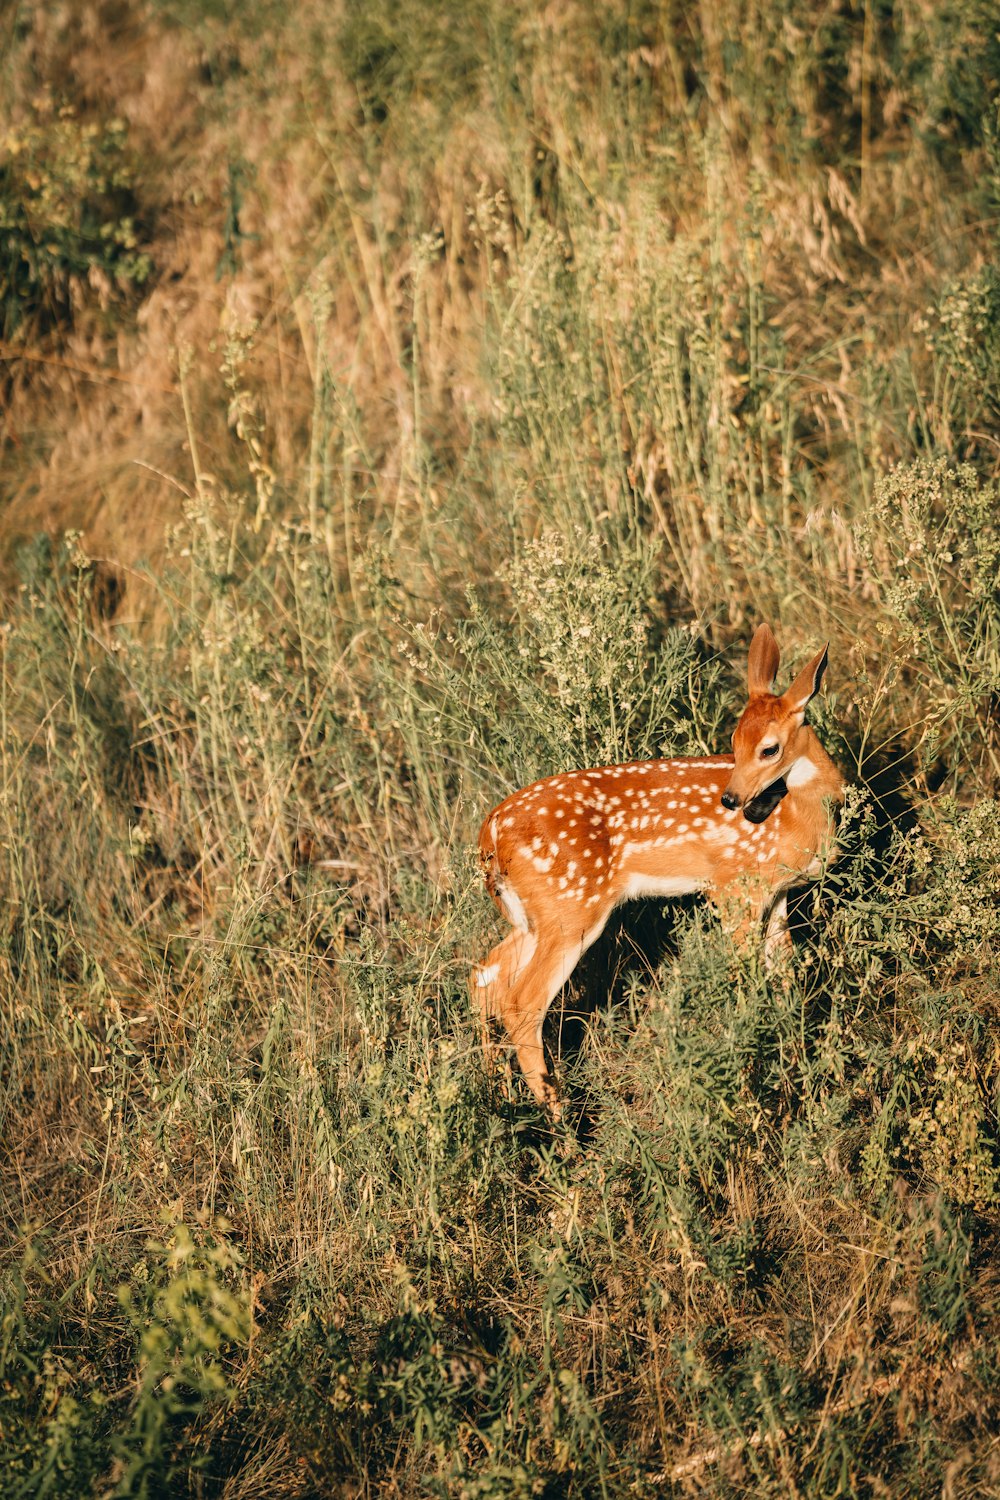 a deer in a grassy area